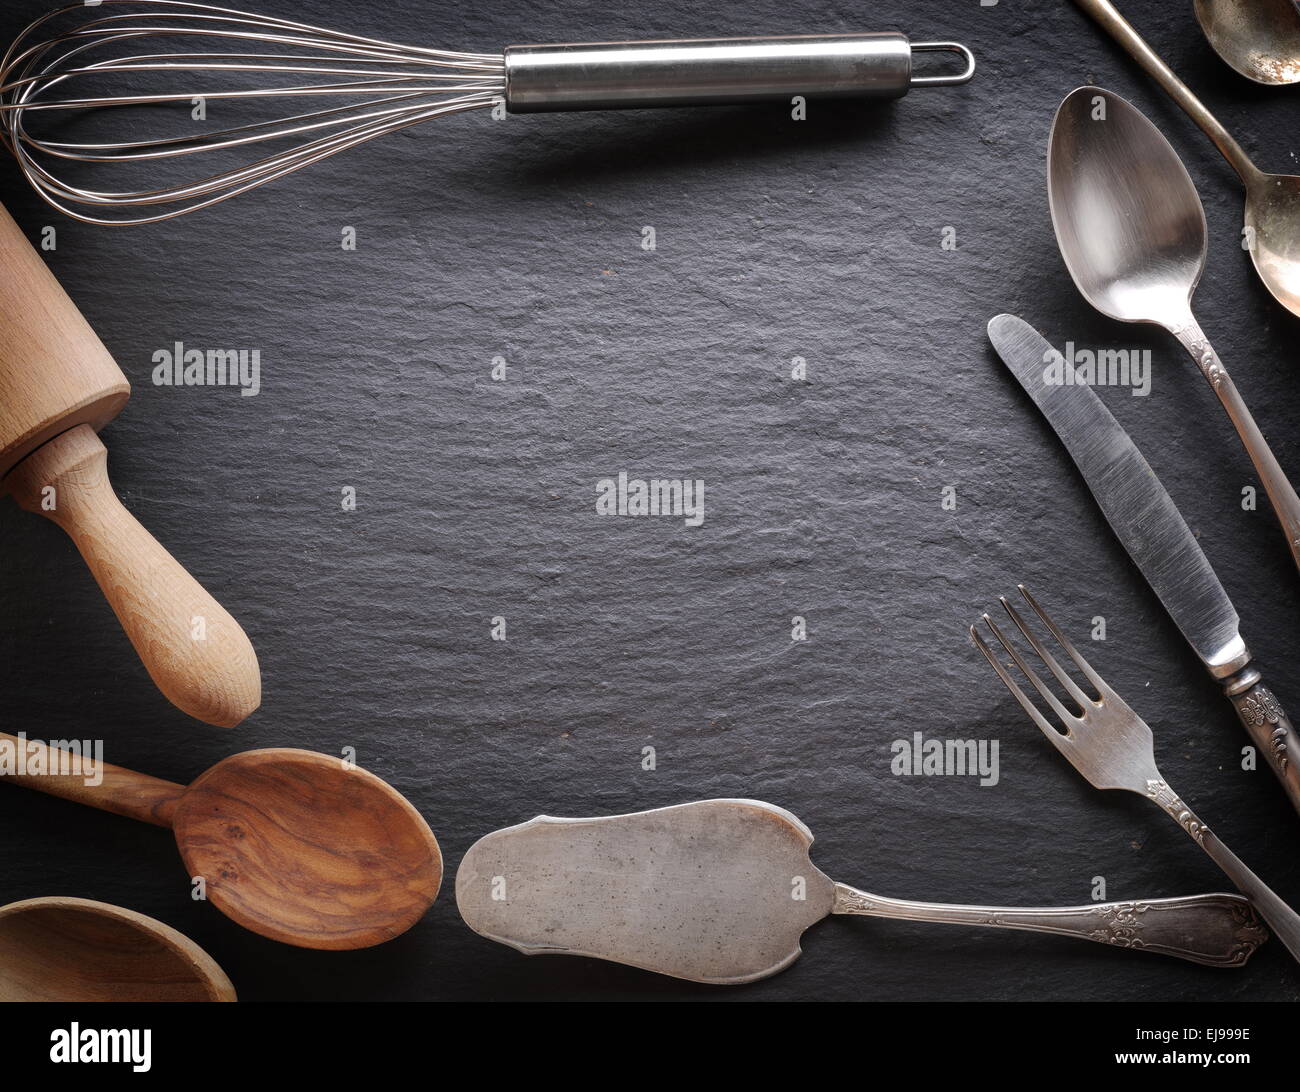 Cooking utensils on a dark gray background. Stock Photo